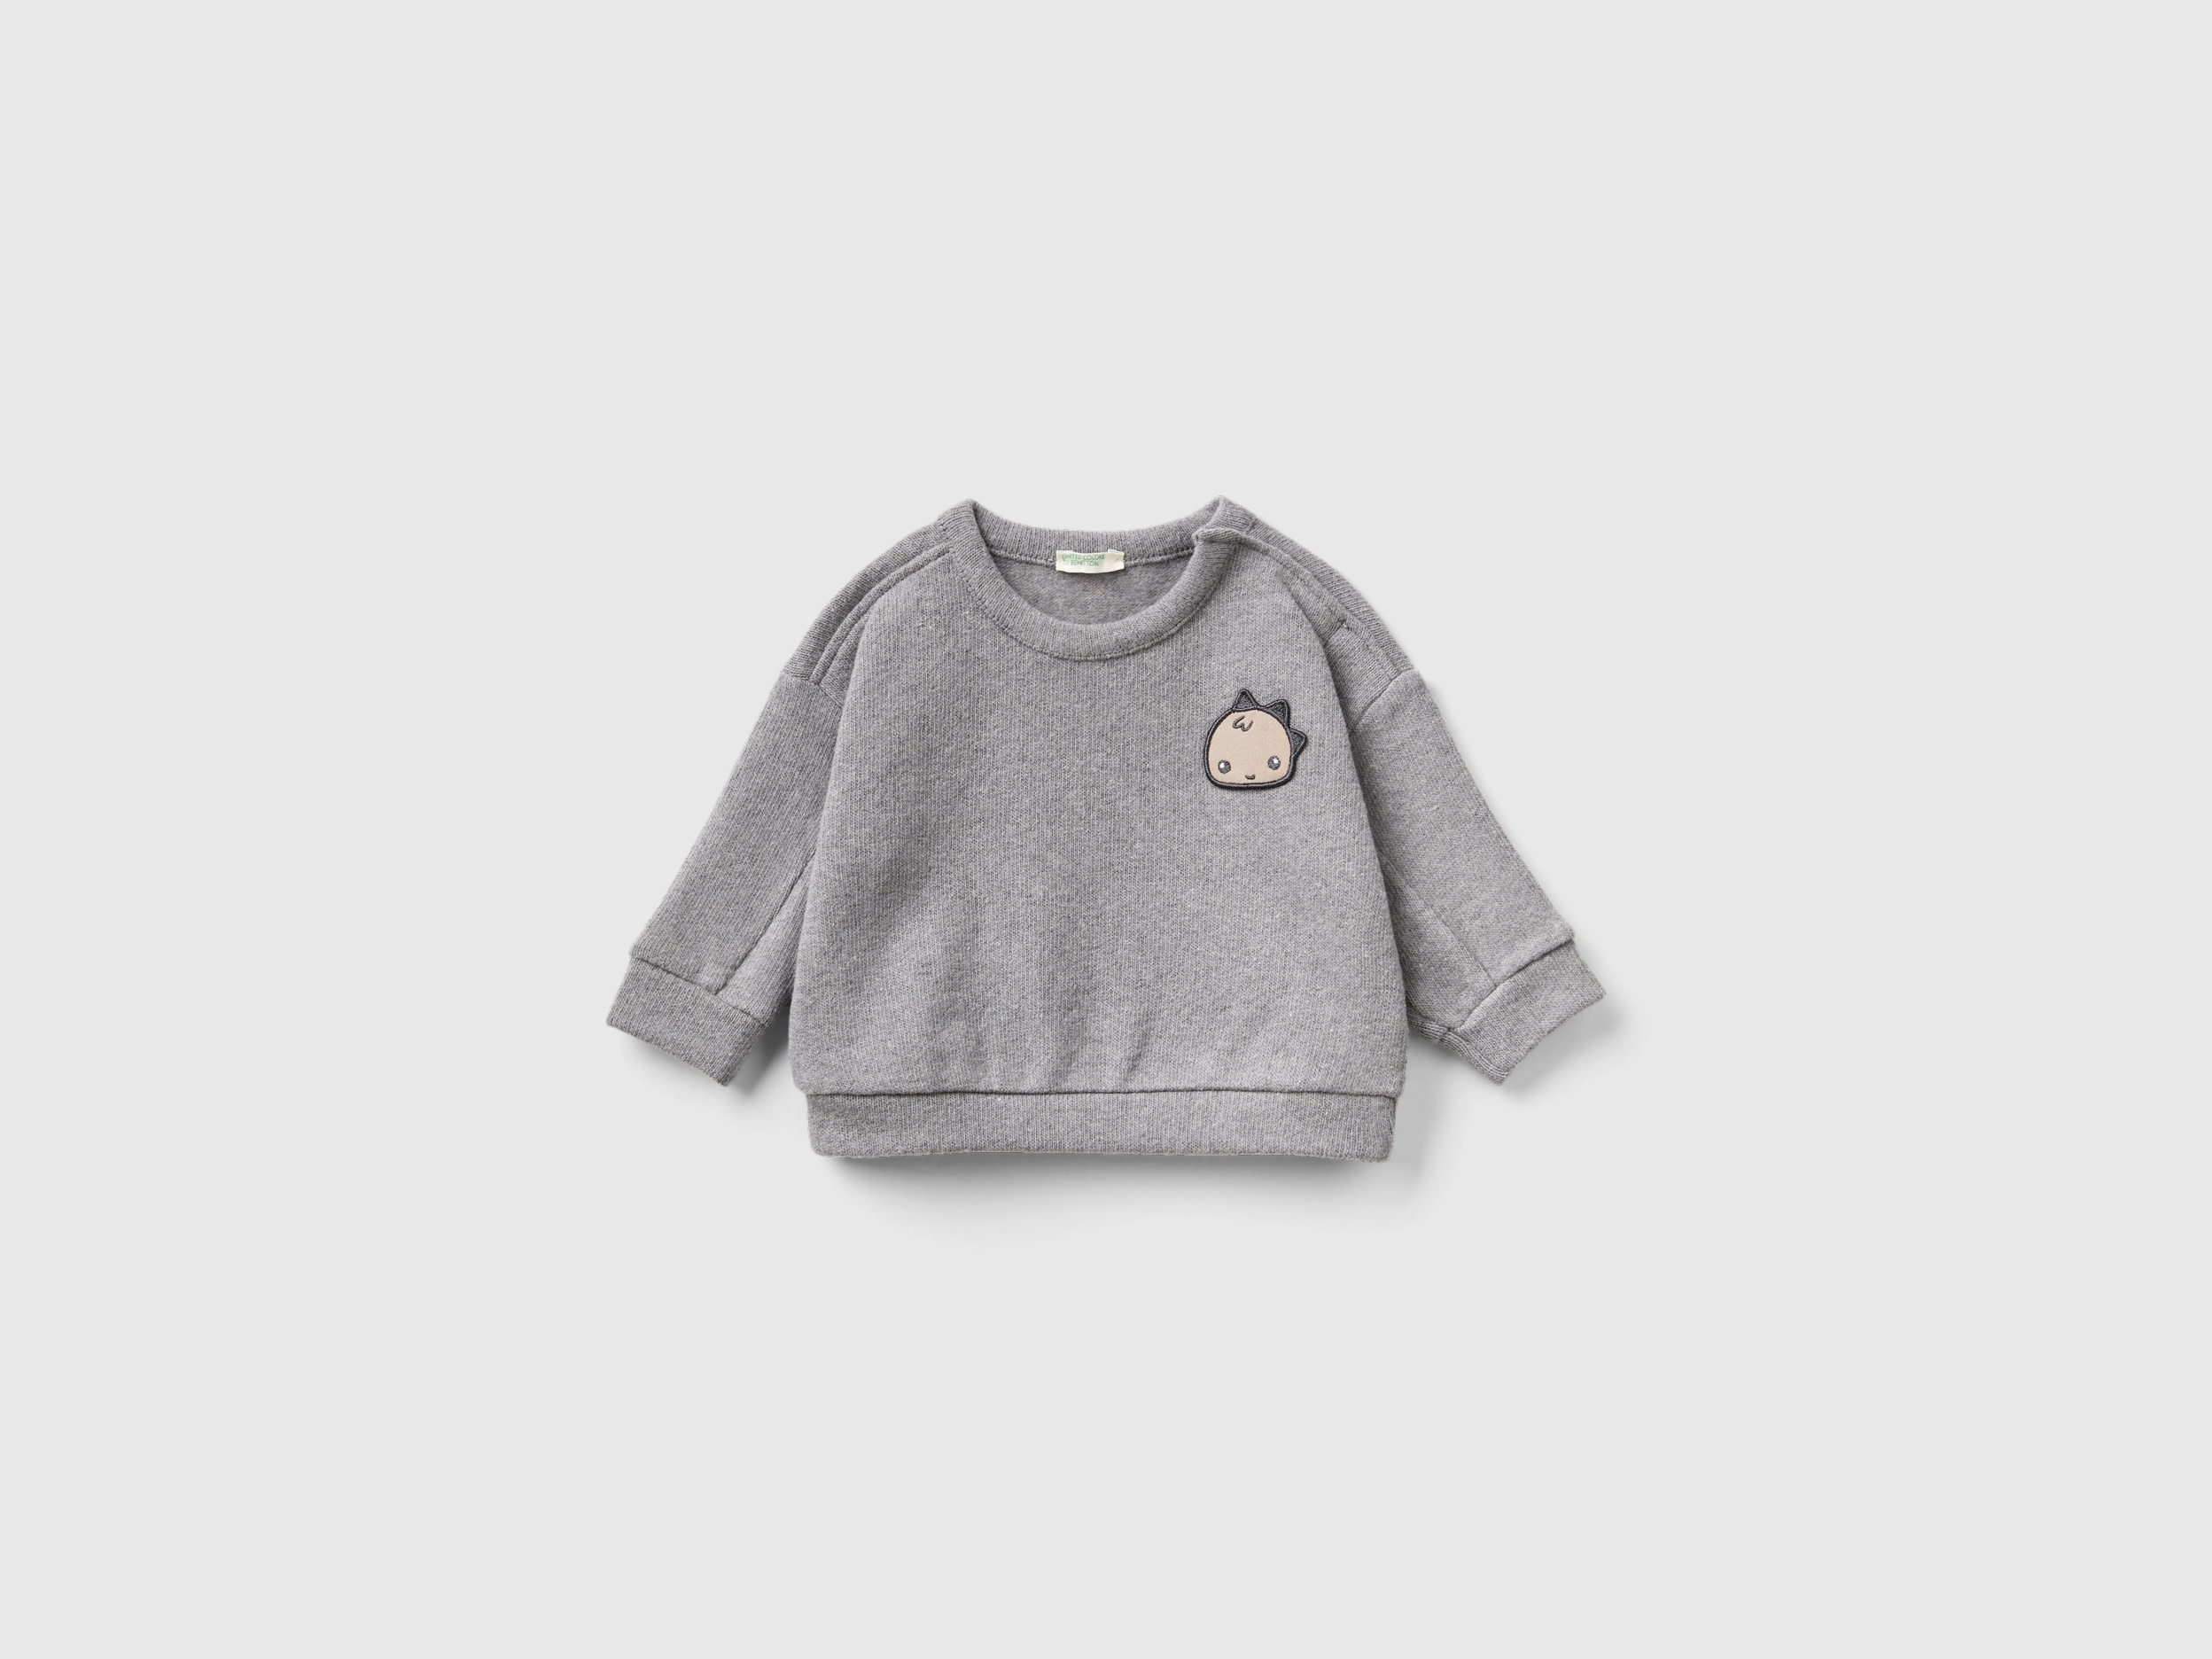 Benetton, Sweatshirt In Recycled Cotton Blend, size 12-18, Gray, Kids